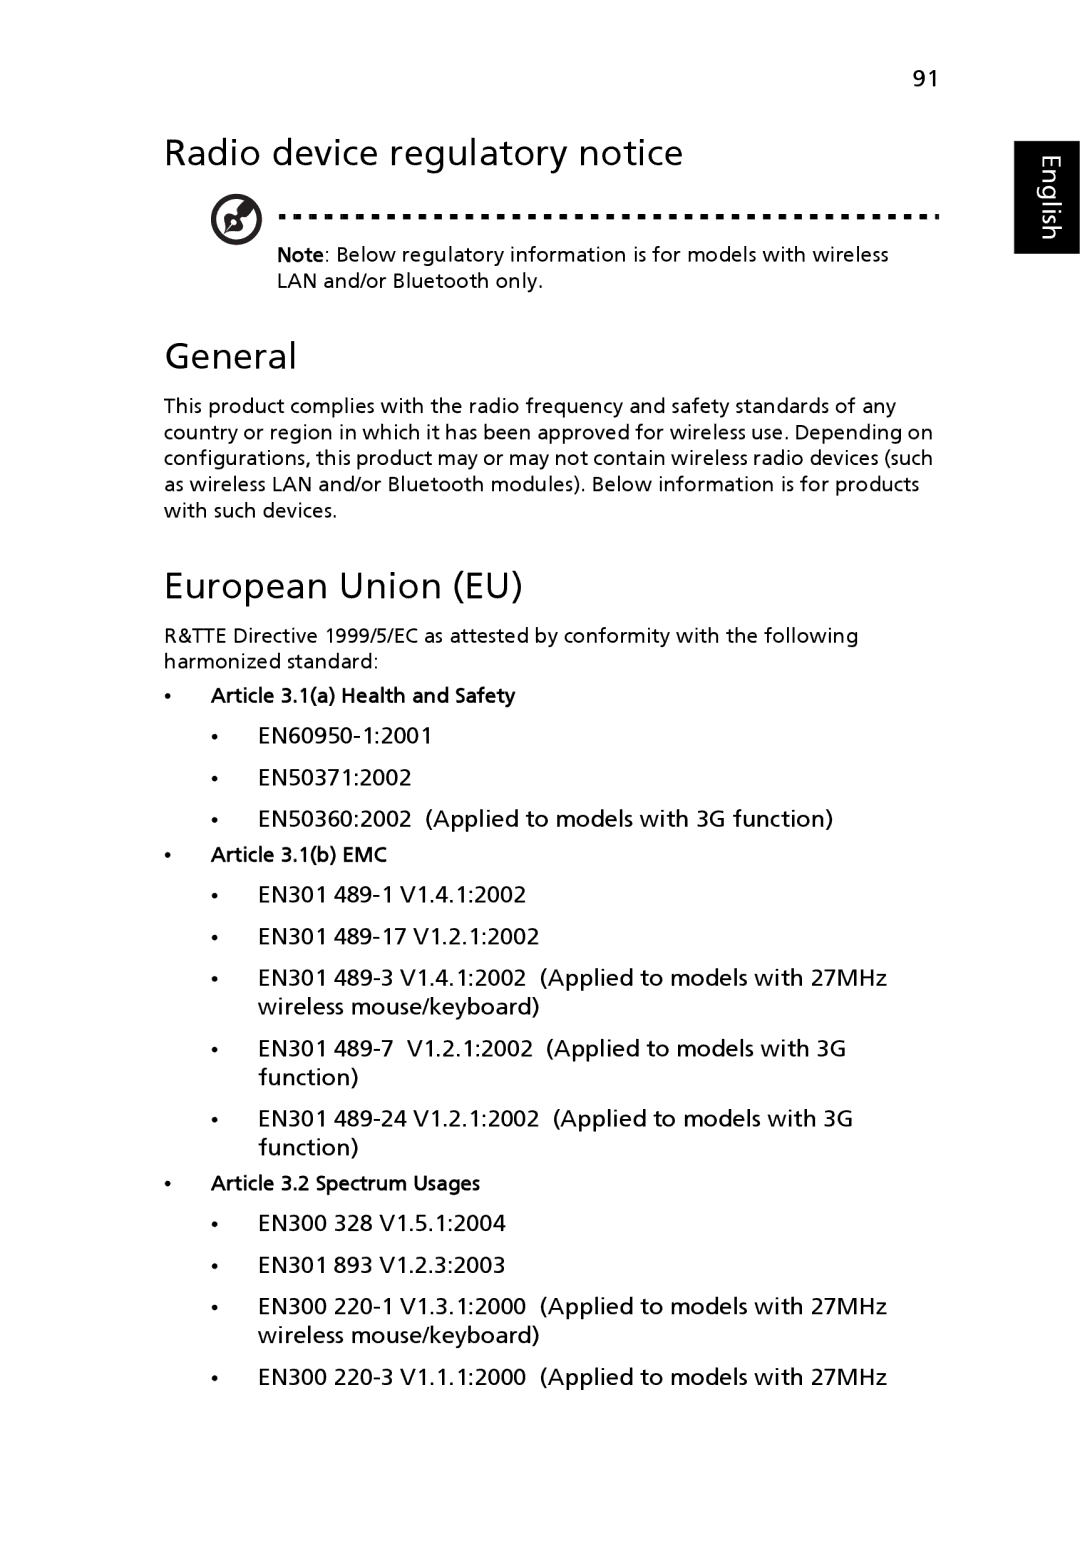 Acer 7720G Radio device regulatory notice General, European Union EU, Article 3.1a Health and Safety, Article 3.1b EMC 